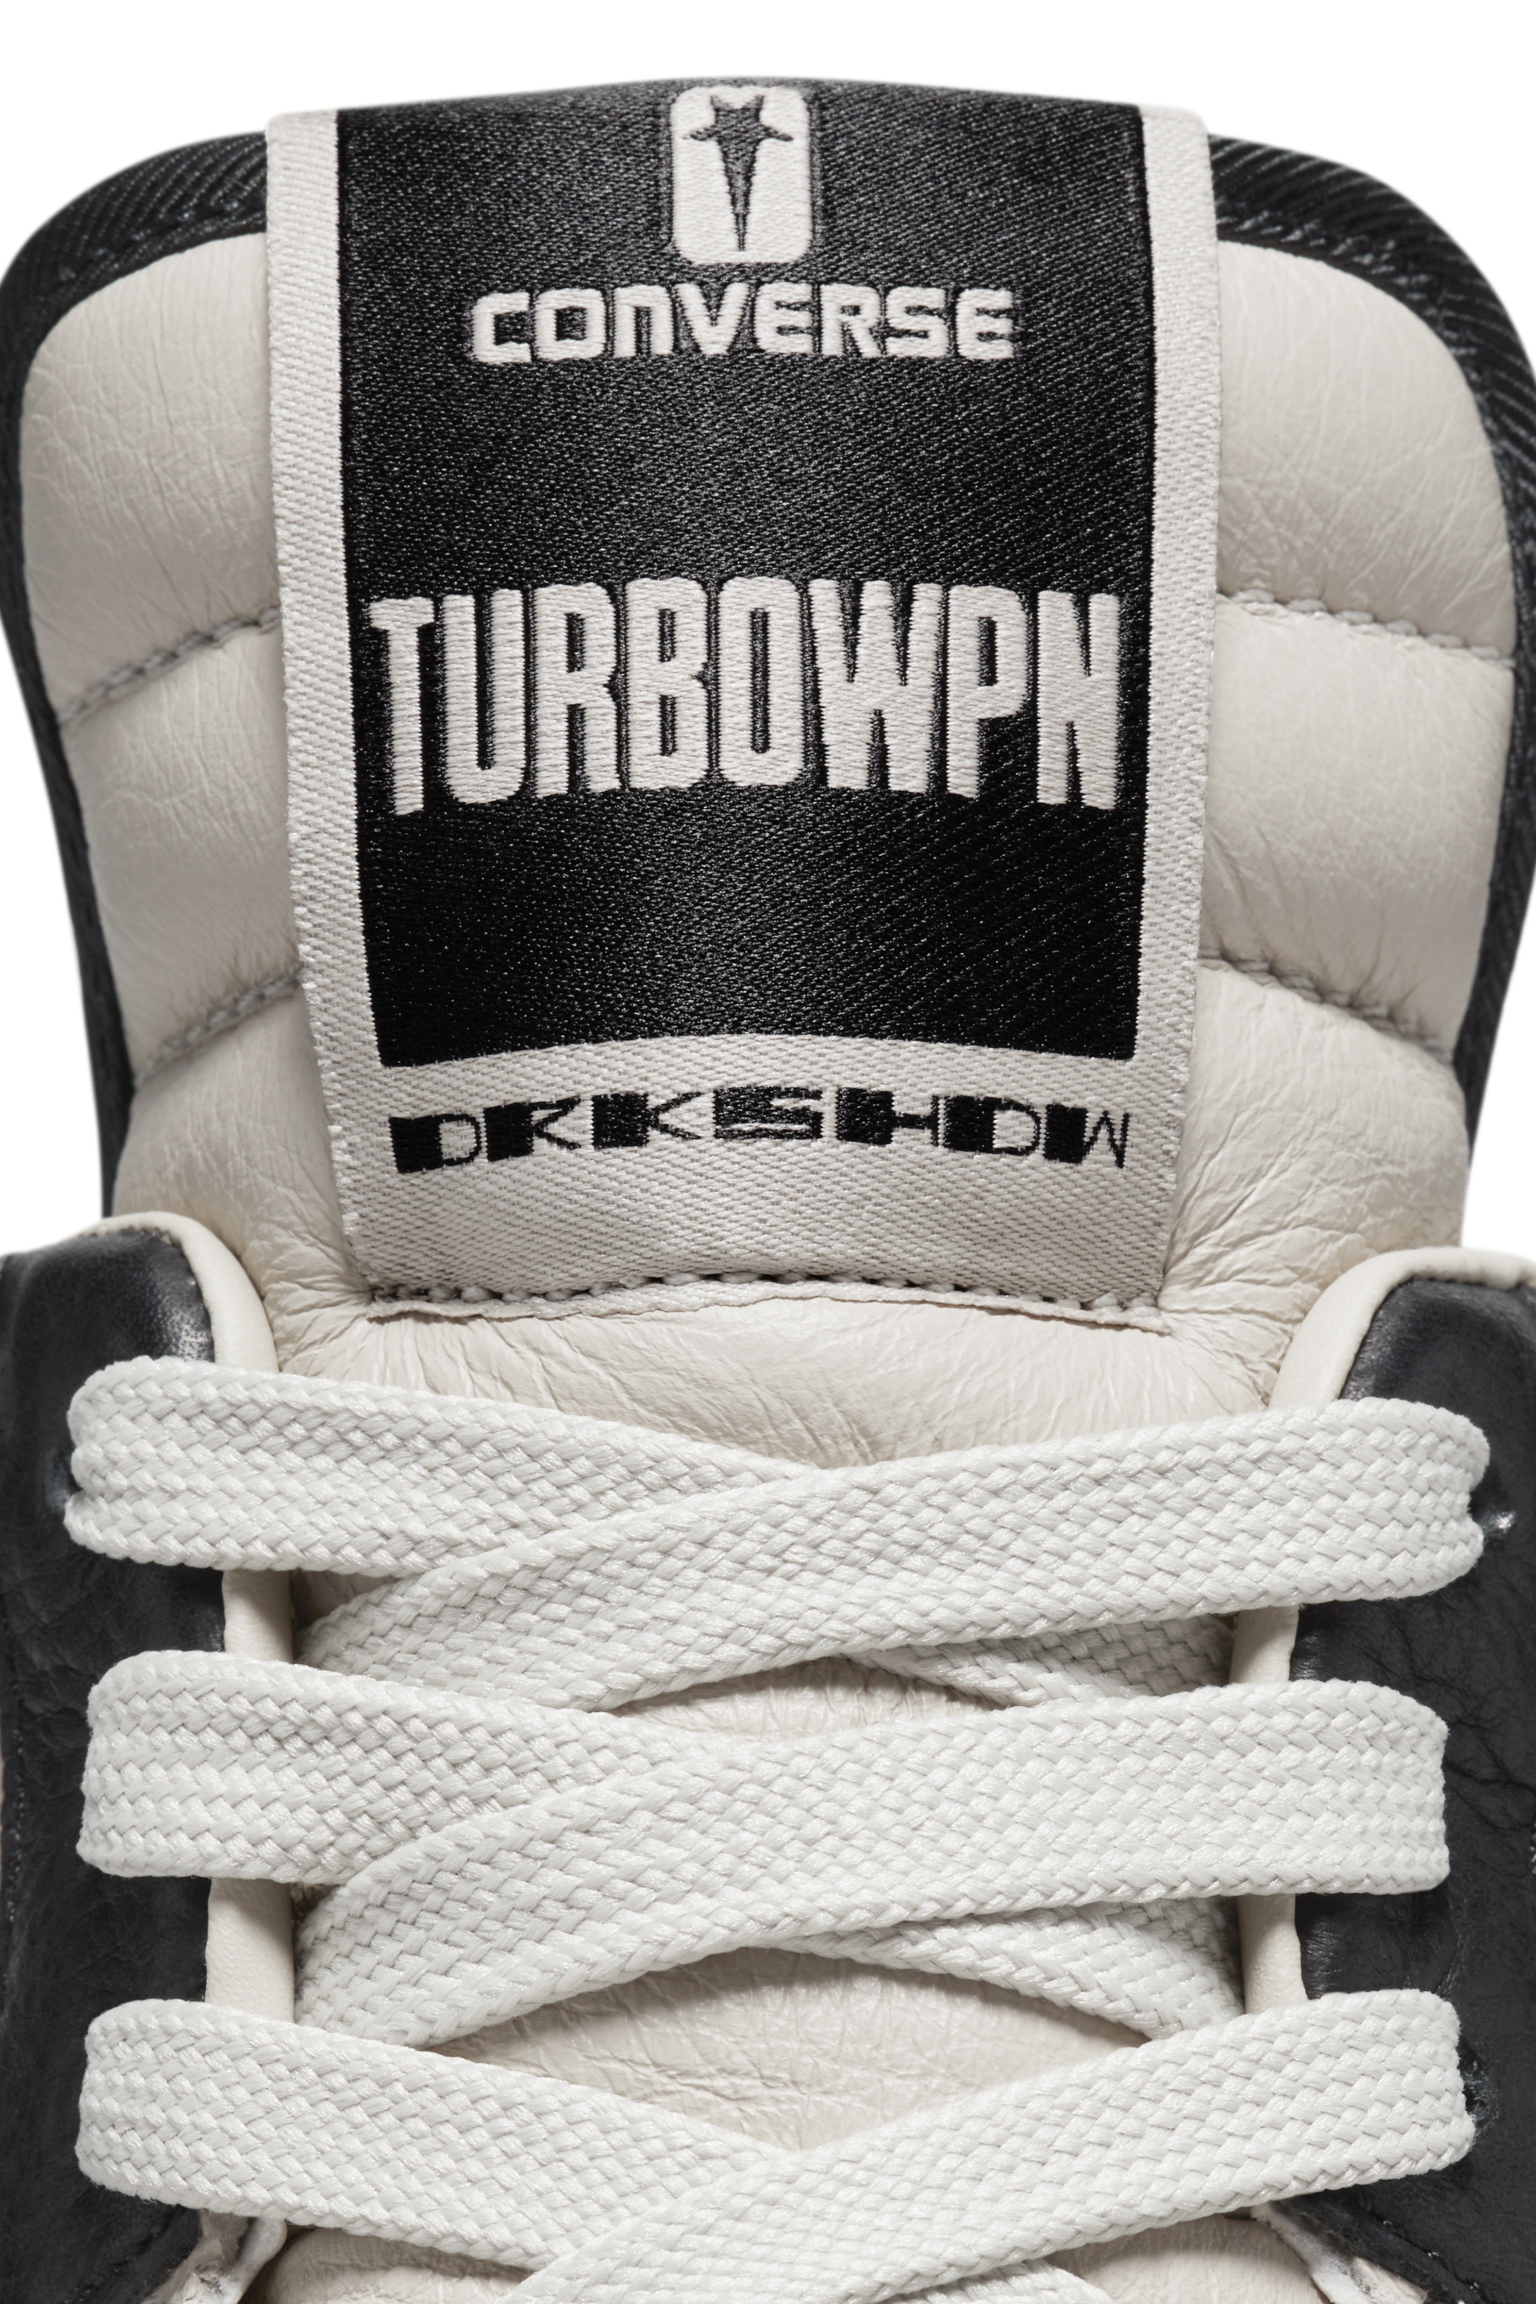 Converse x DRKSHDW 'TURBOWPN' (A06758C-031) Release Date. Nike SNKRS